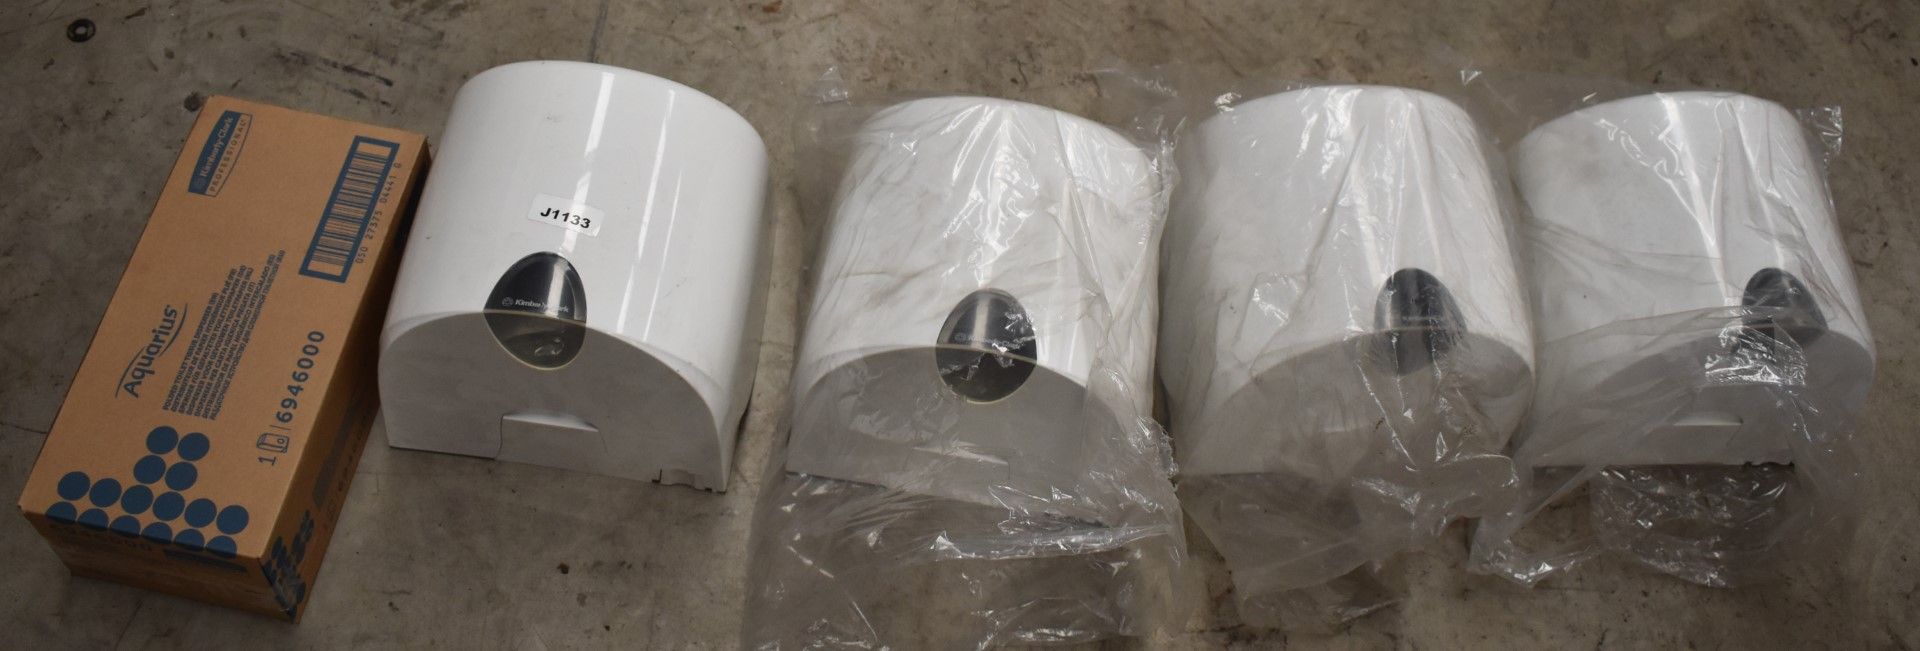 4 x Kimberly Clark Towel Dispensers and 1 x Aquarious Soap Dispenser - Unused - CL390 - Ref - Image 2 of 2